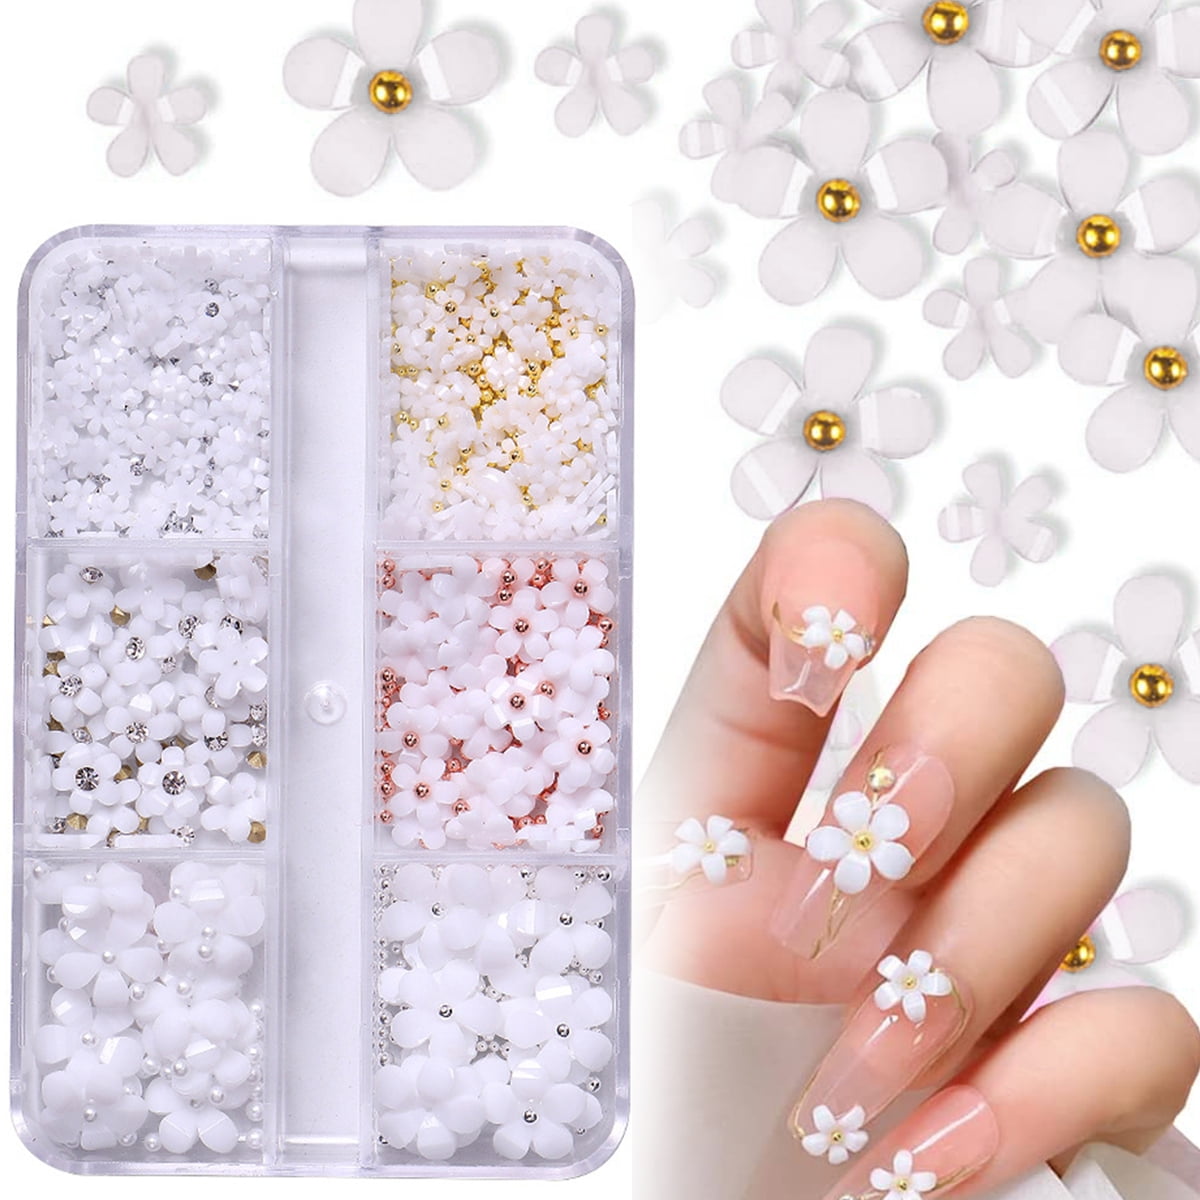 Nail Ornaments 3D Flower Fall-proof Colored Nail Resin Charms Accessories